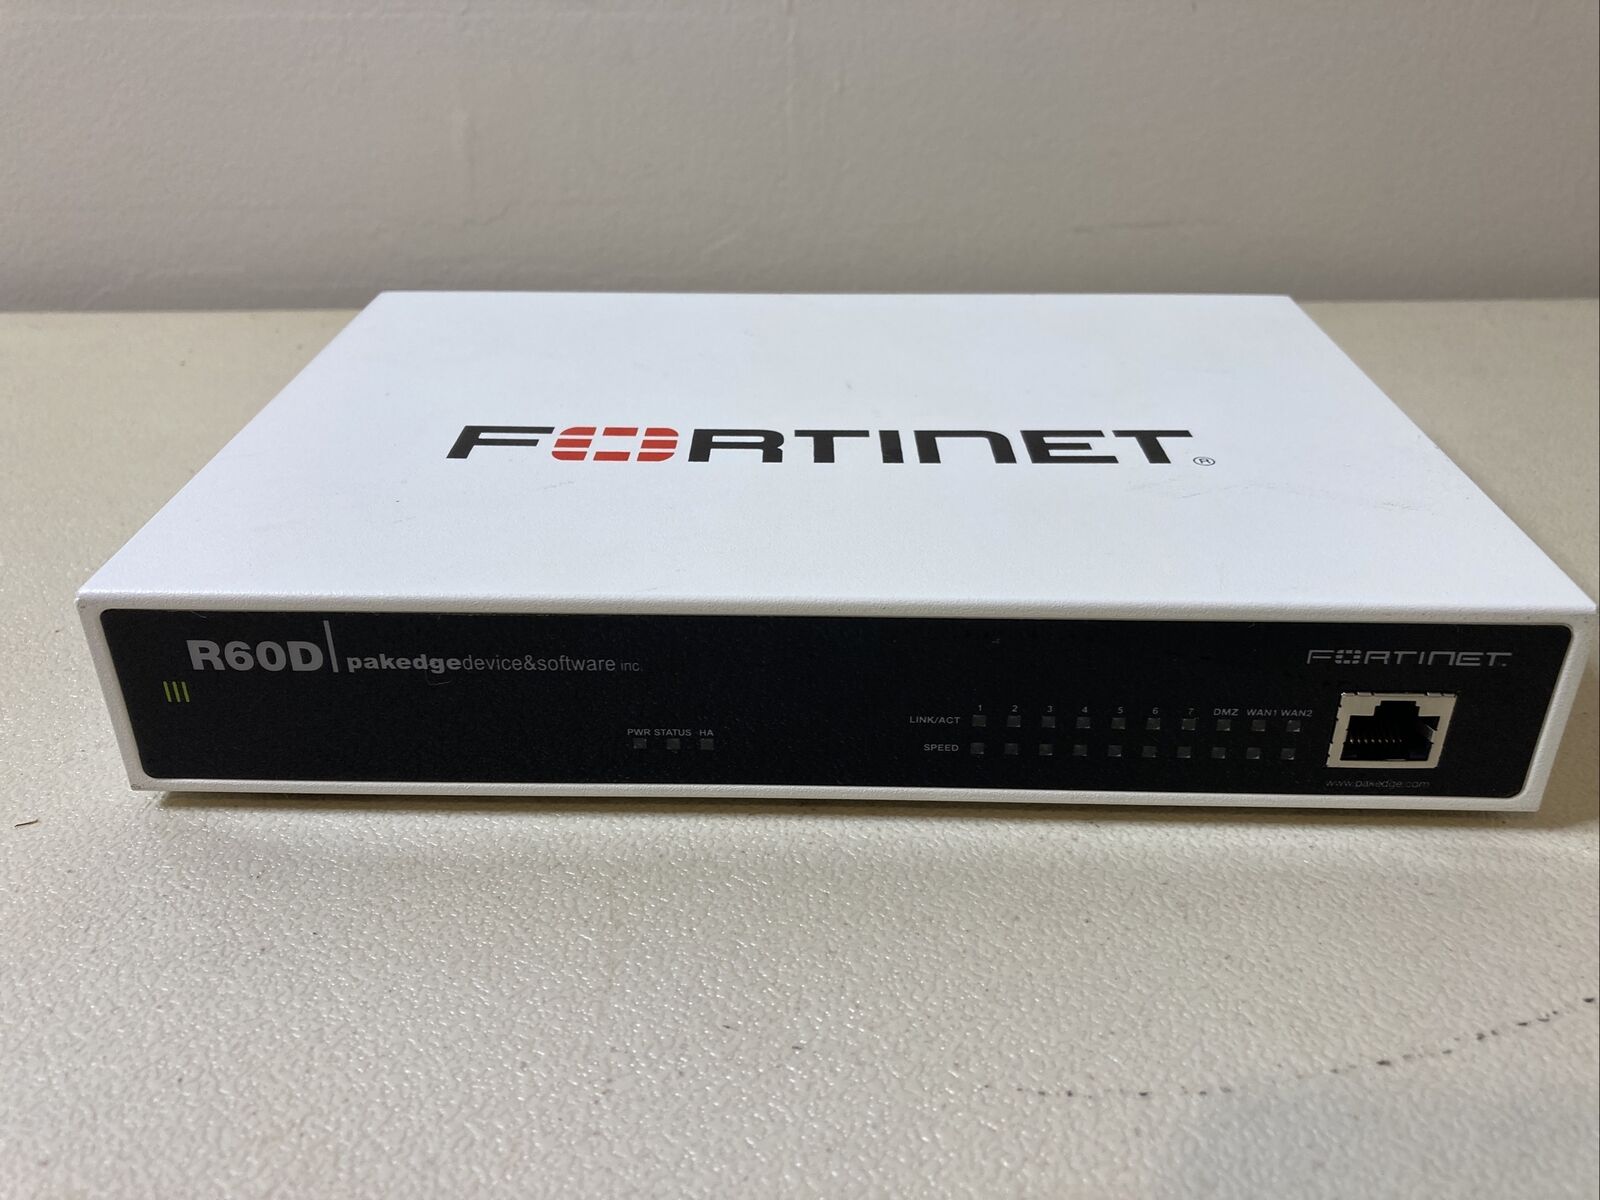 FORTINET Pakedge Device Software R60D FG-60D Network Firewall